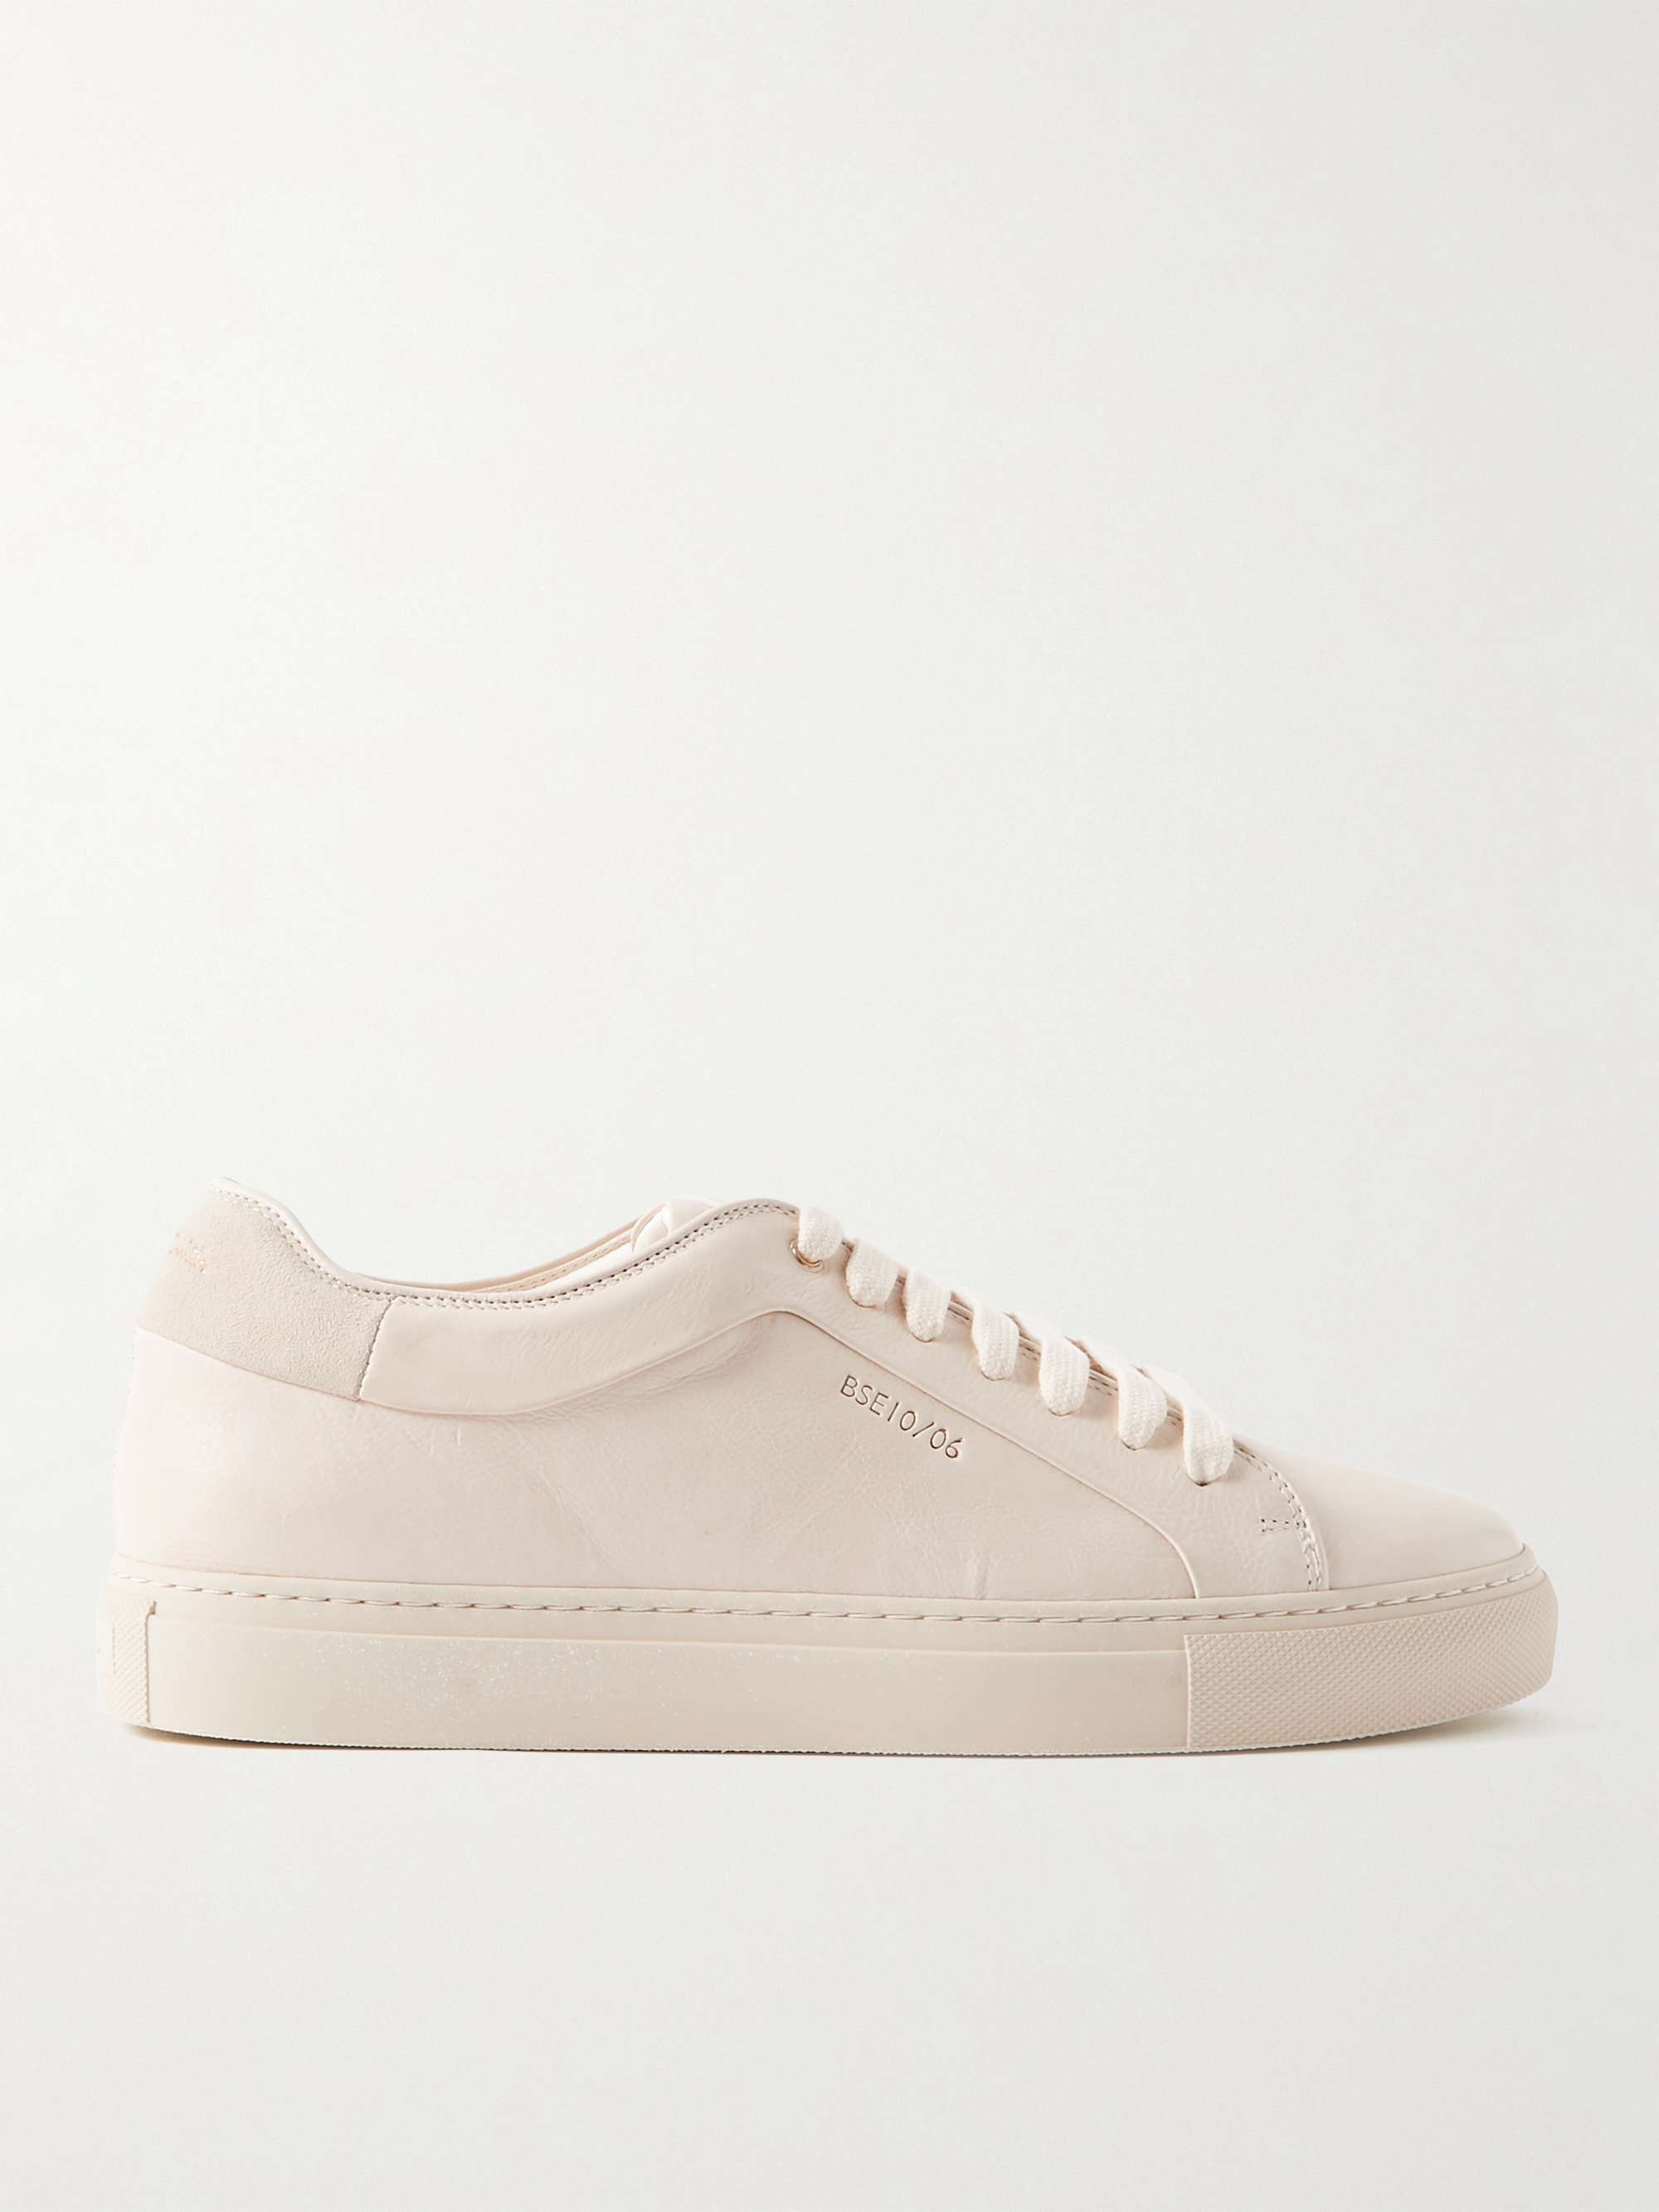 PAUL SMITH Basso ECO Leather Sneakers | MR PORTER